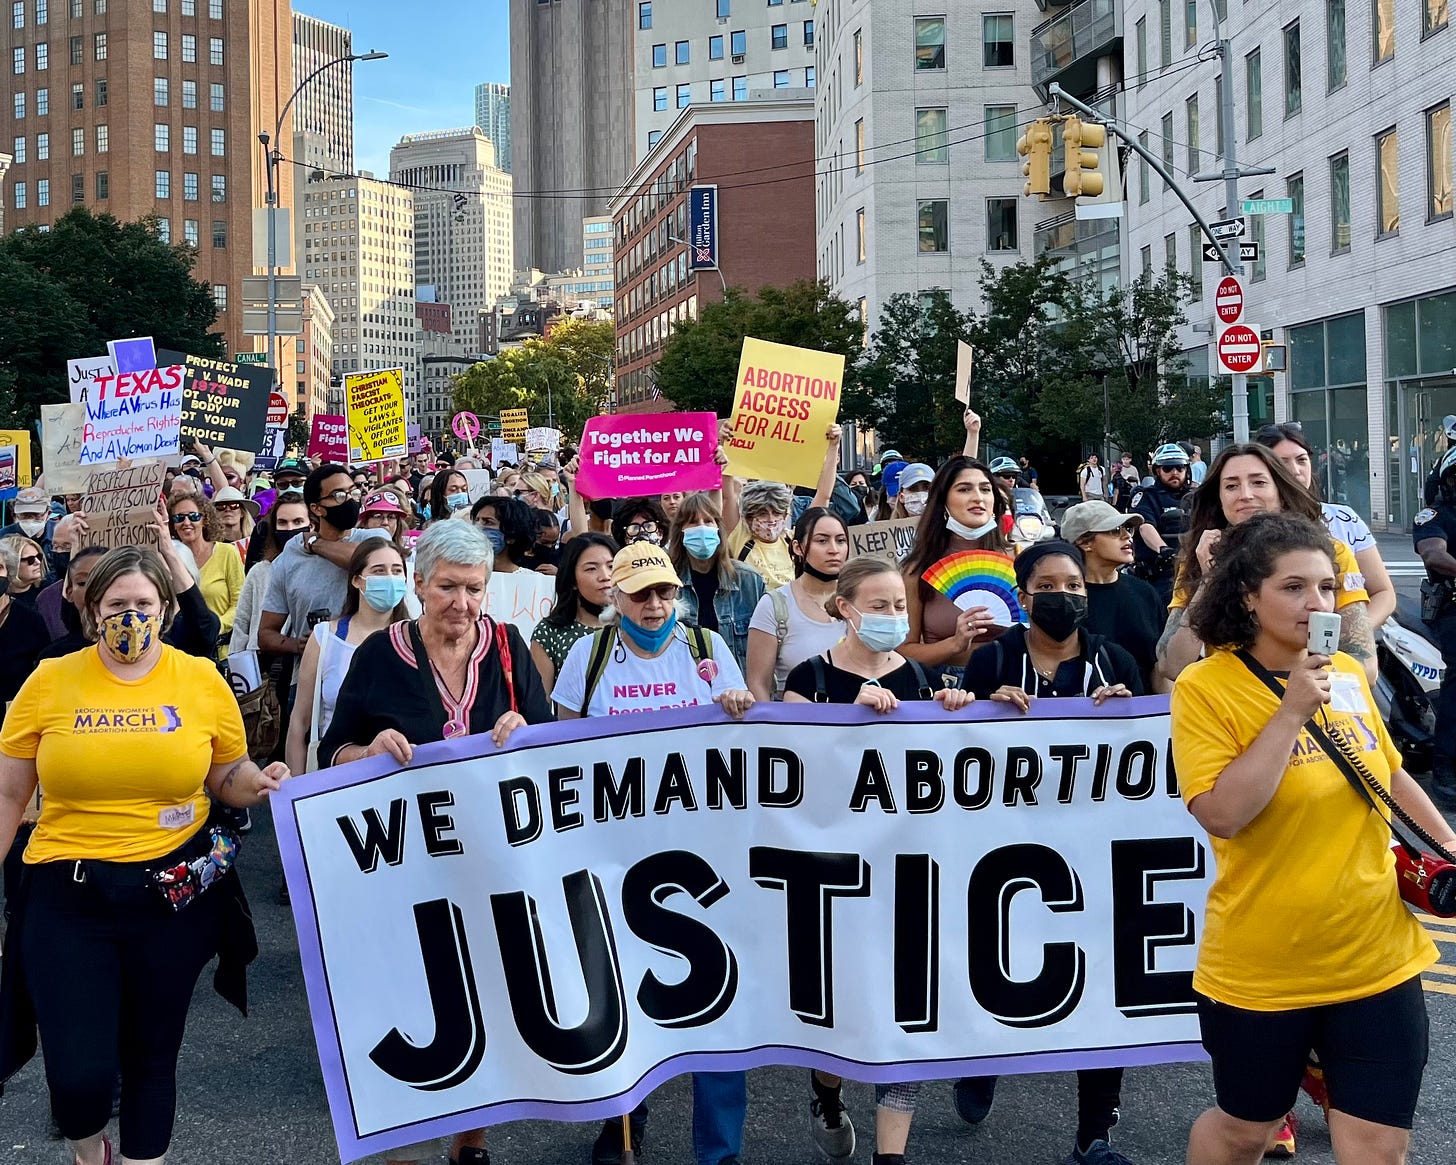 A large group of people march through the streets of New York City. In front, several people carry a sign that reads, "We demand abortion justice."